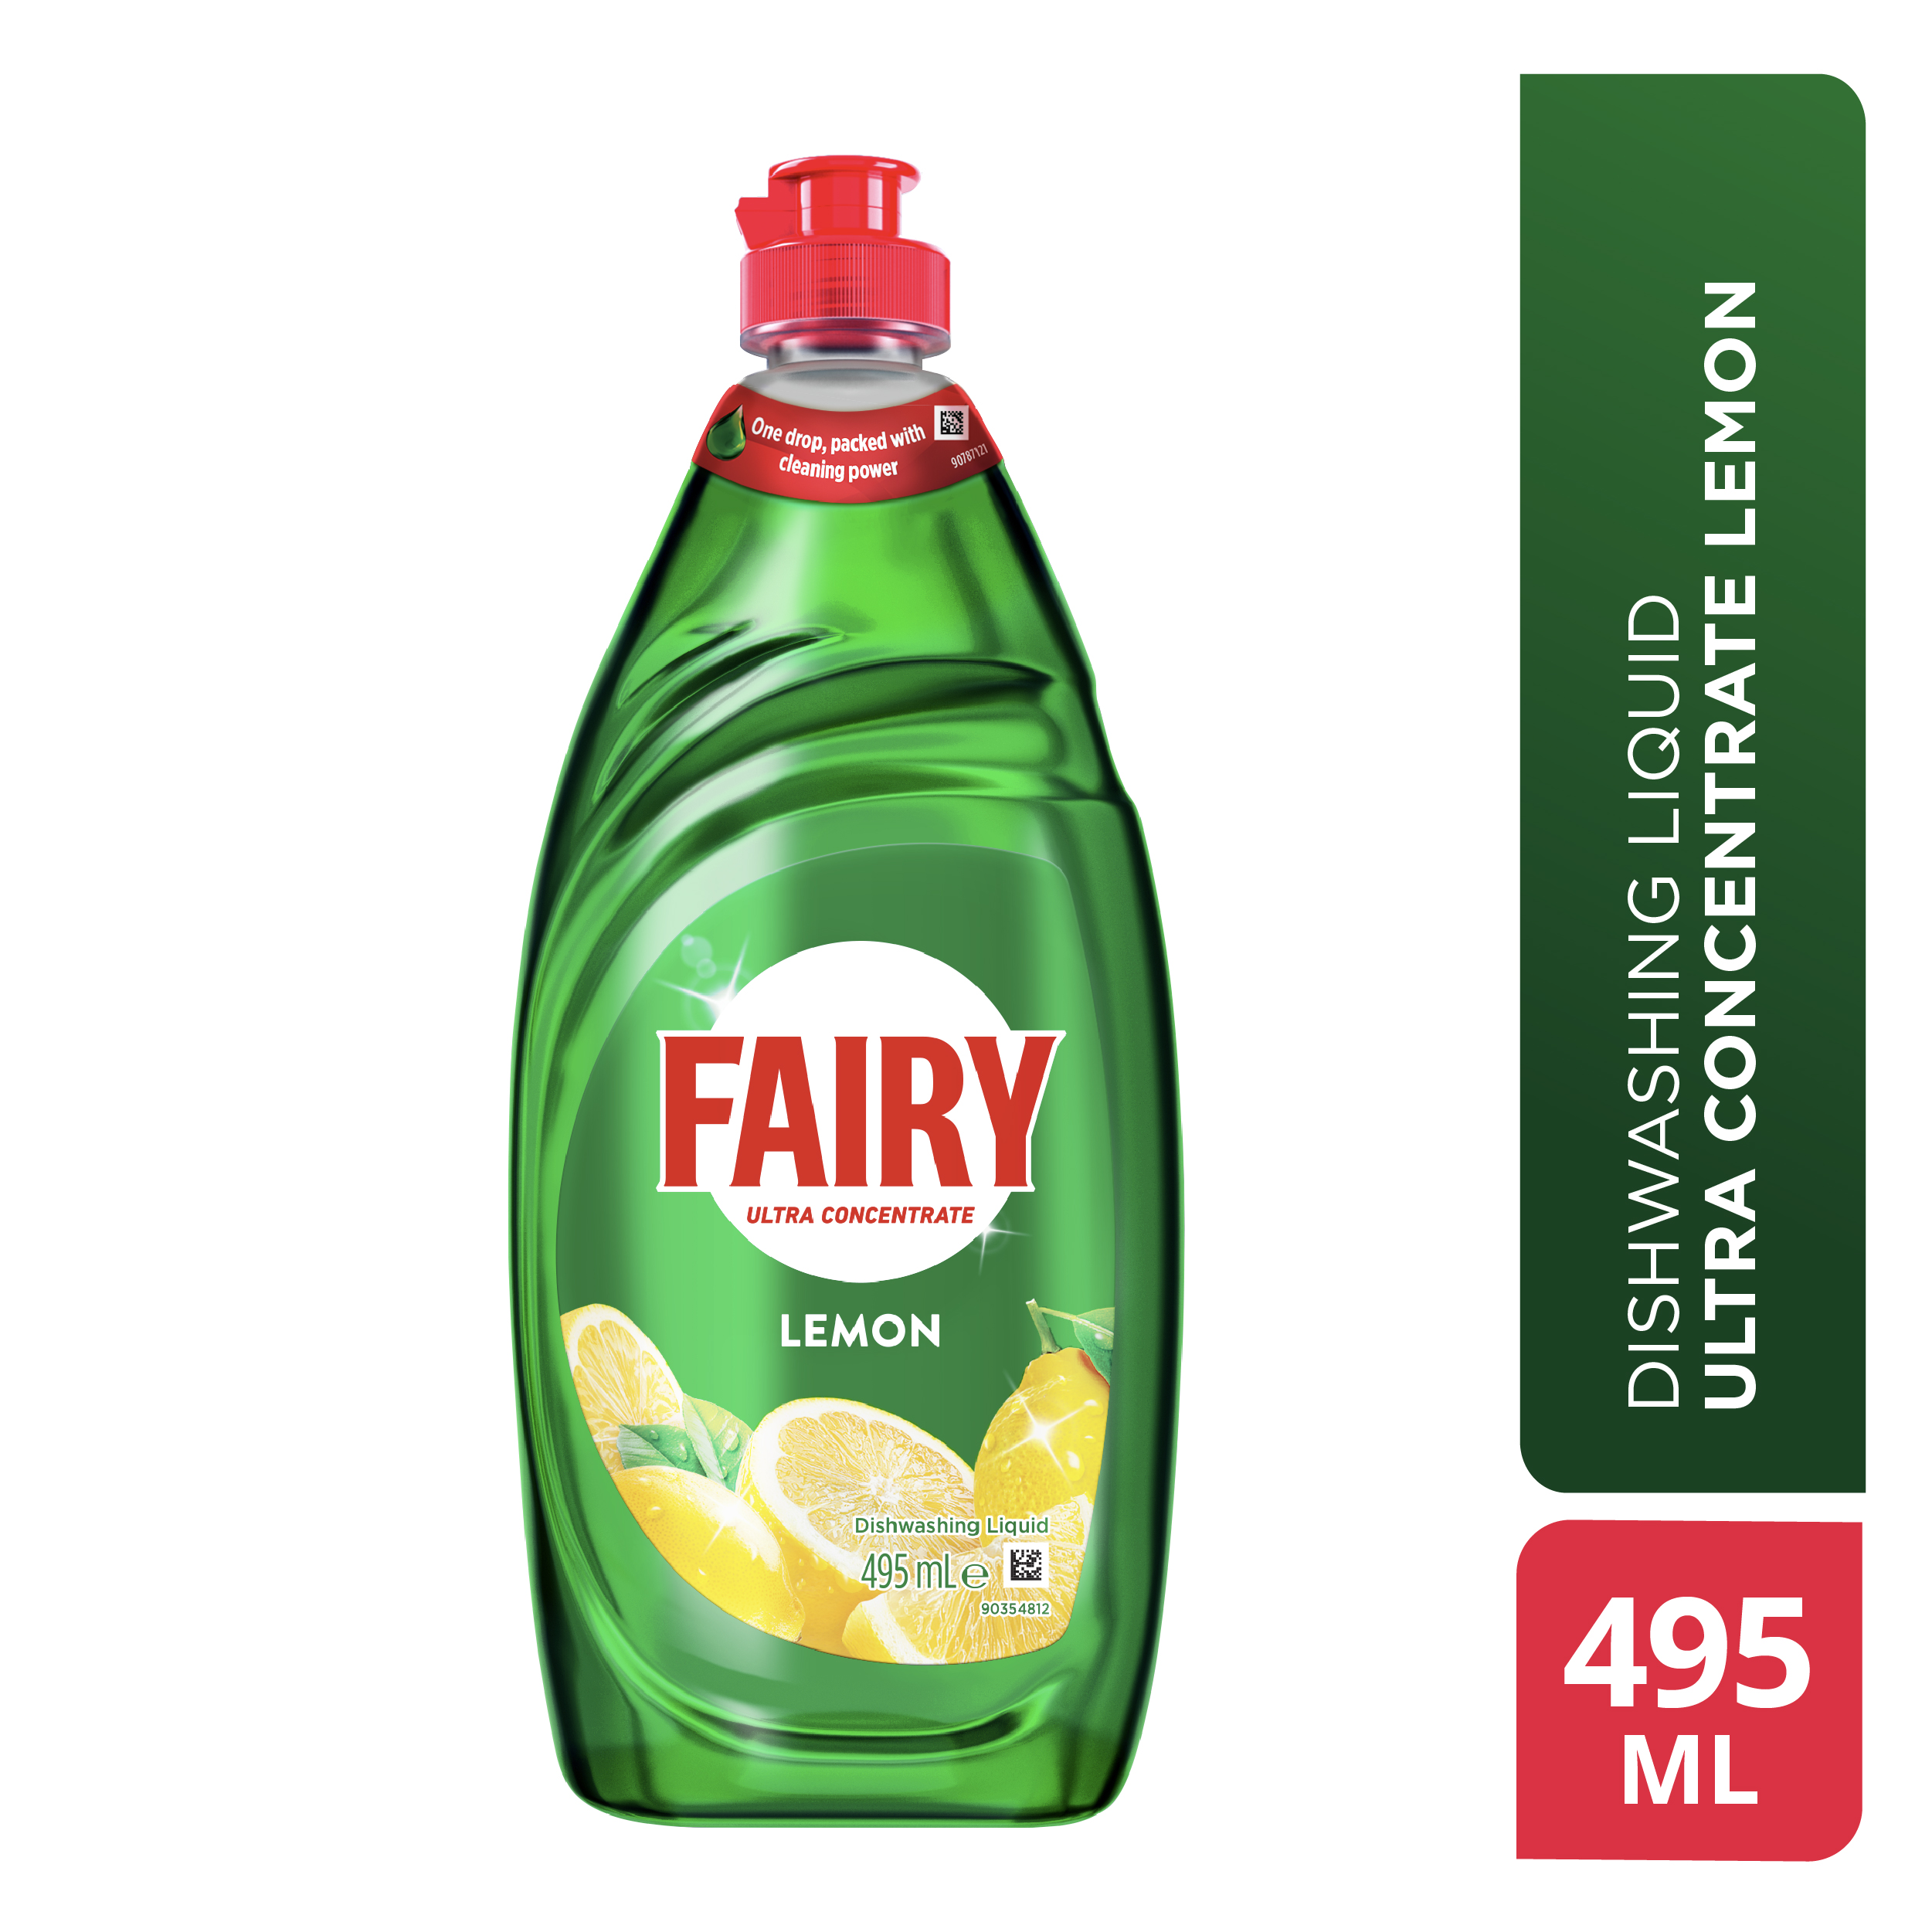 One drop of Fairy Ultra Concentrate Lemon Dishwashing Liquid (495ml) product is made with recyclable terracycle packaging